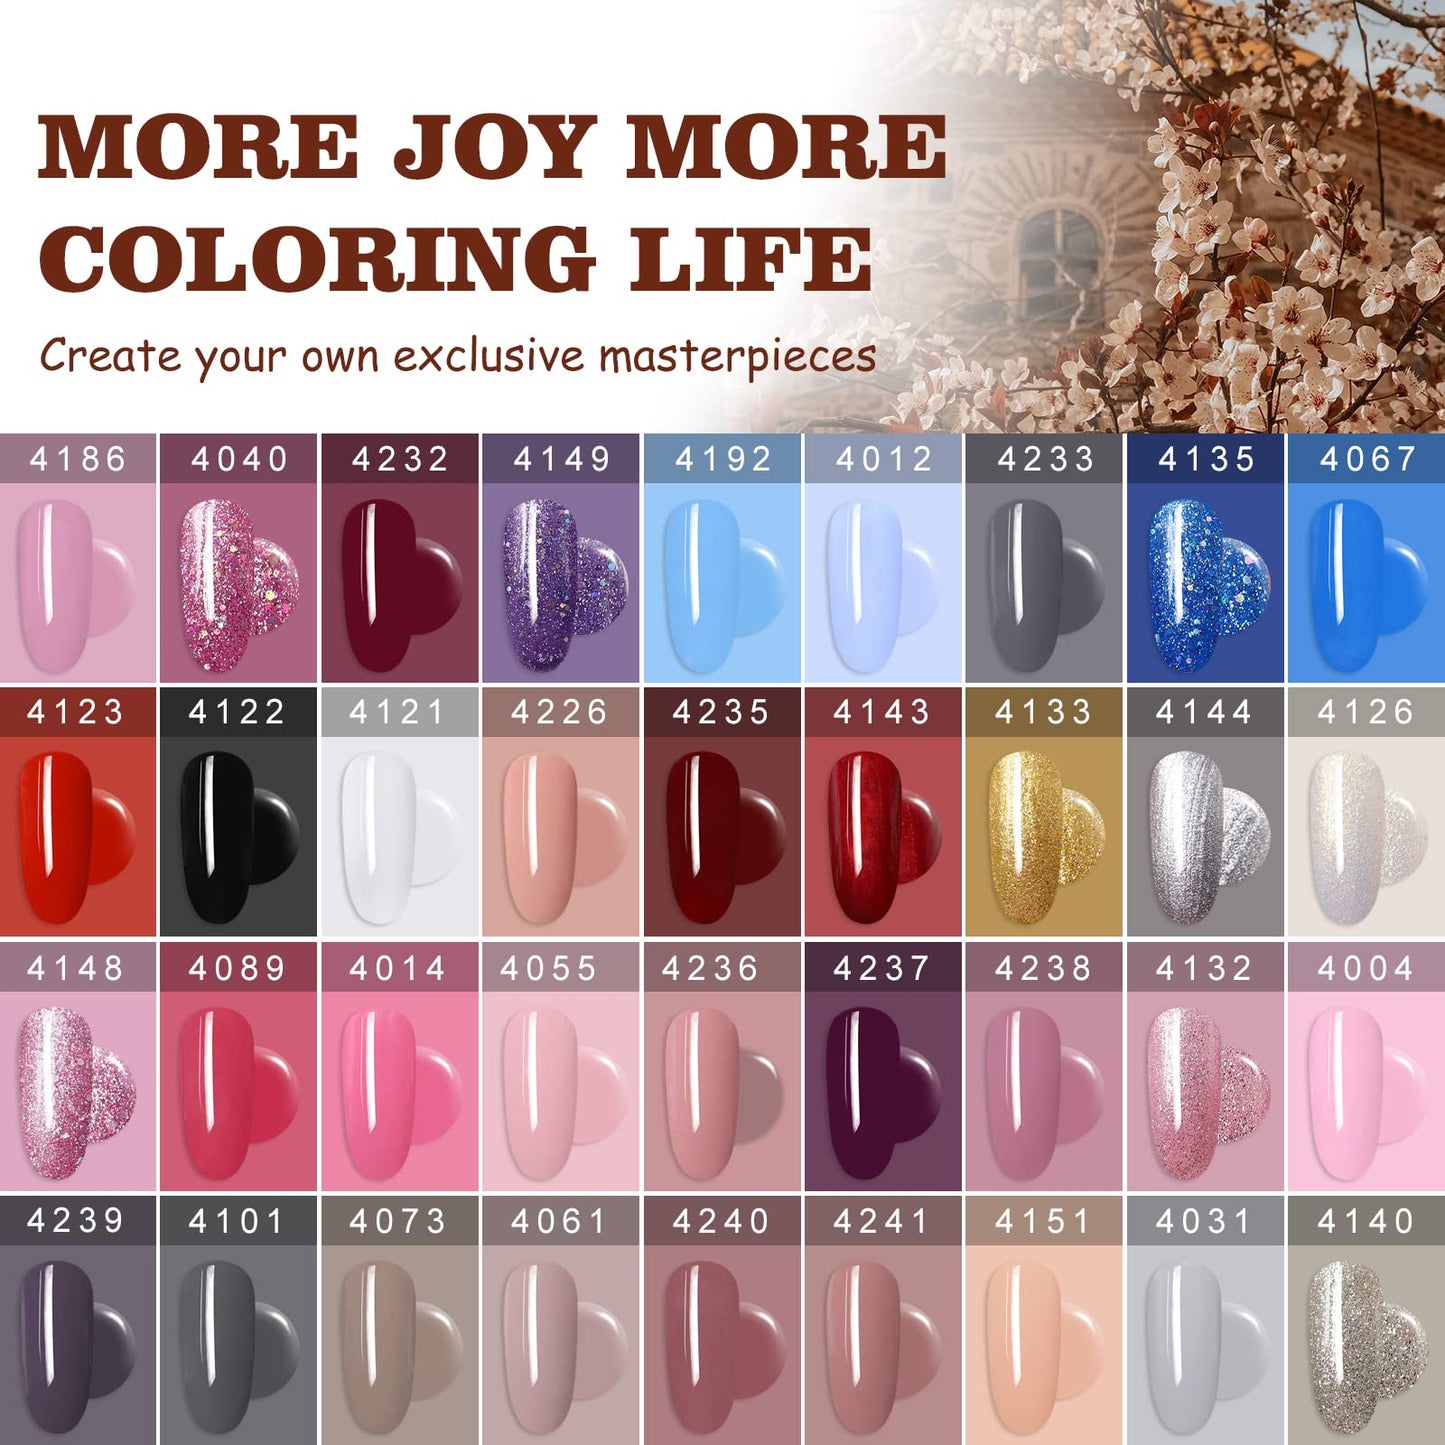 Arte Clavo 36 PCS Gel Nail Polish Set-Classic Macaron Collection AW Red Black and White Pink Blue Glitter Nude Uv Gel Polish Manicure Starter Gifts For Women AC3603…